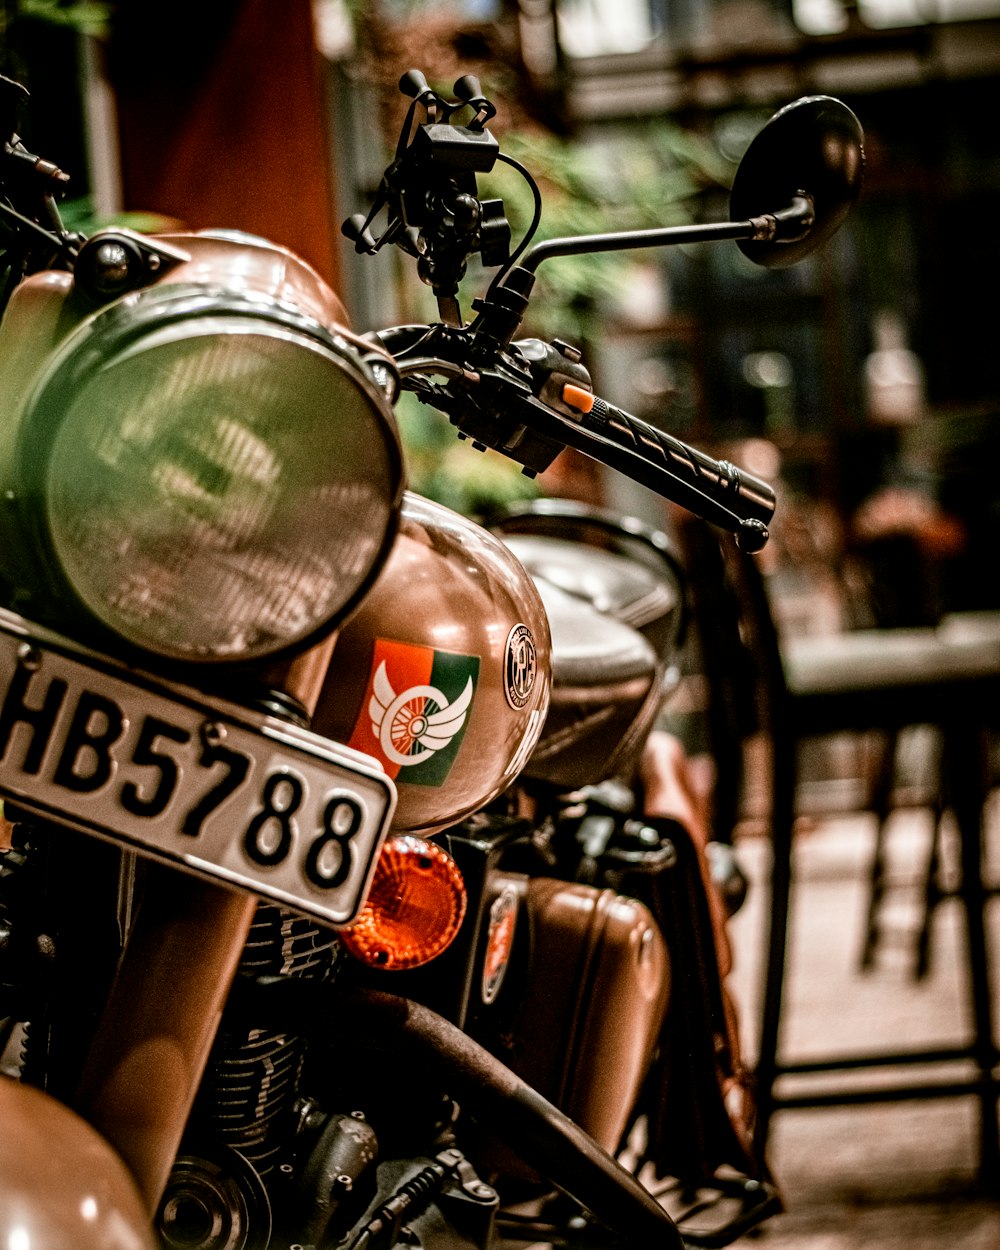 a close up of a motorcycle with a license plate